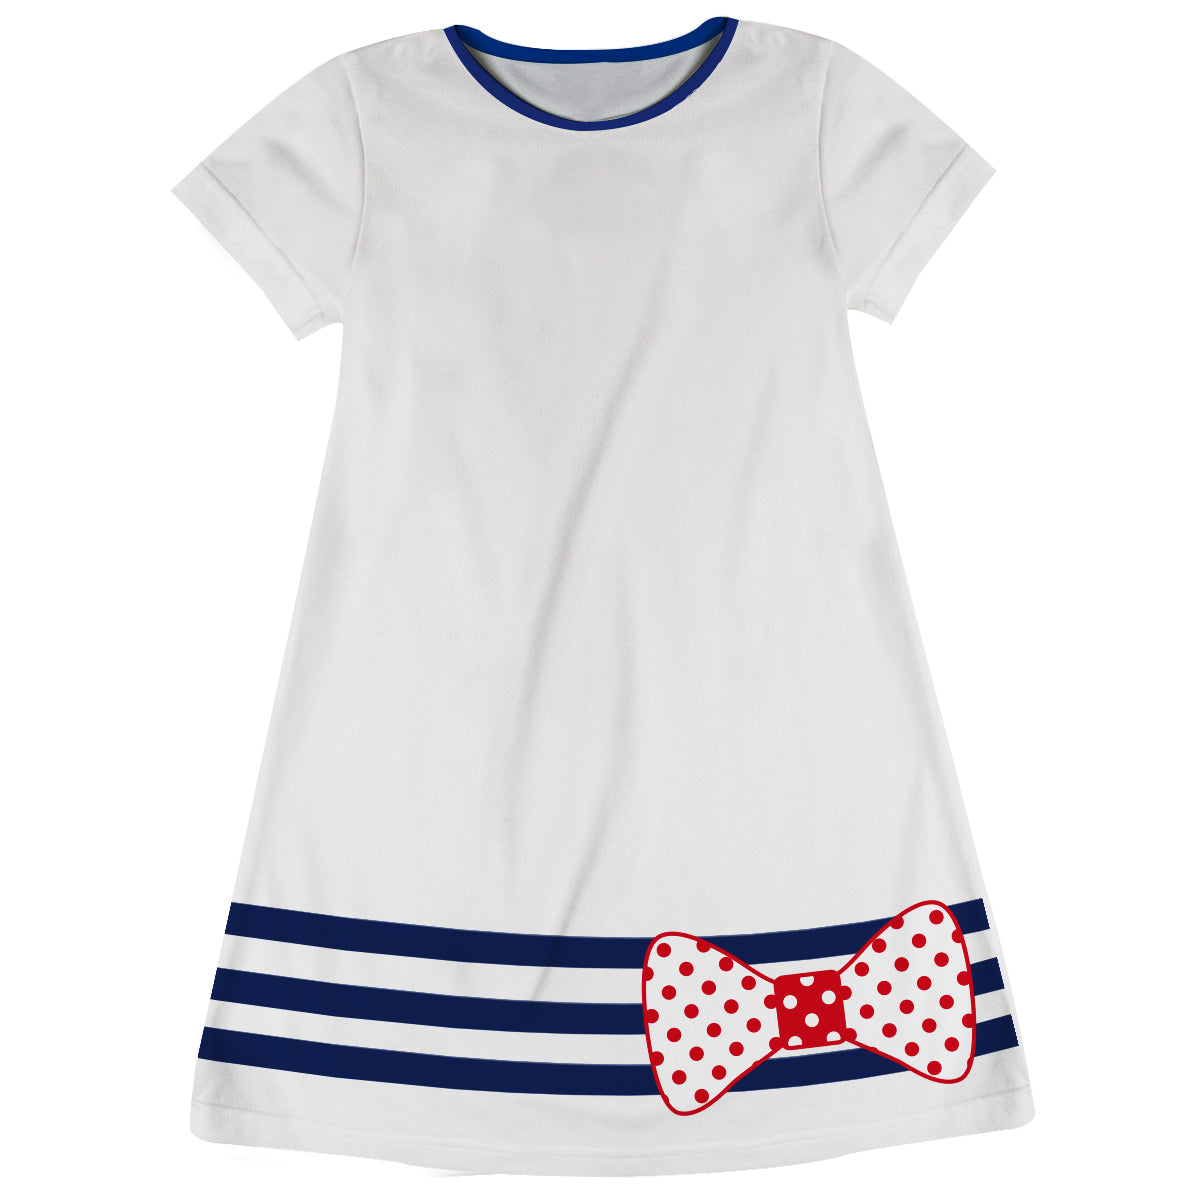 Bow Name White Short Sleeve A Line Dress - Wimziy&Co.